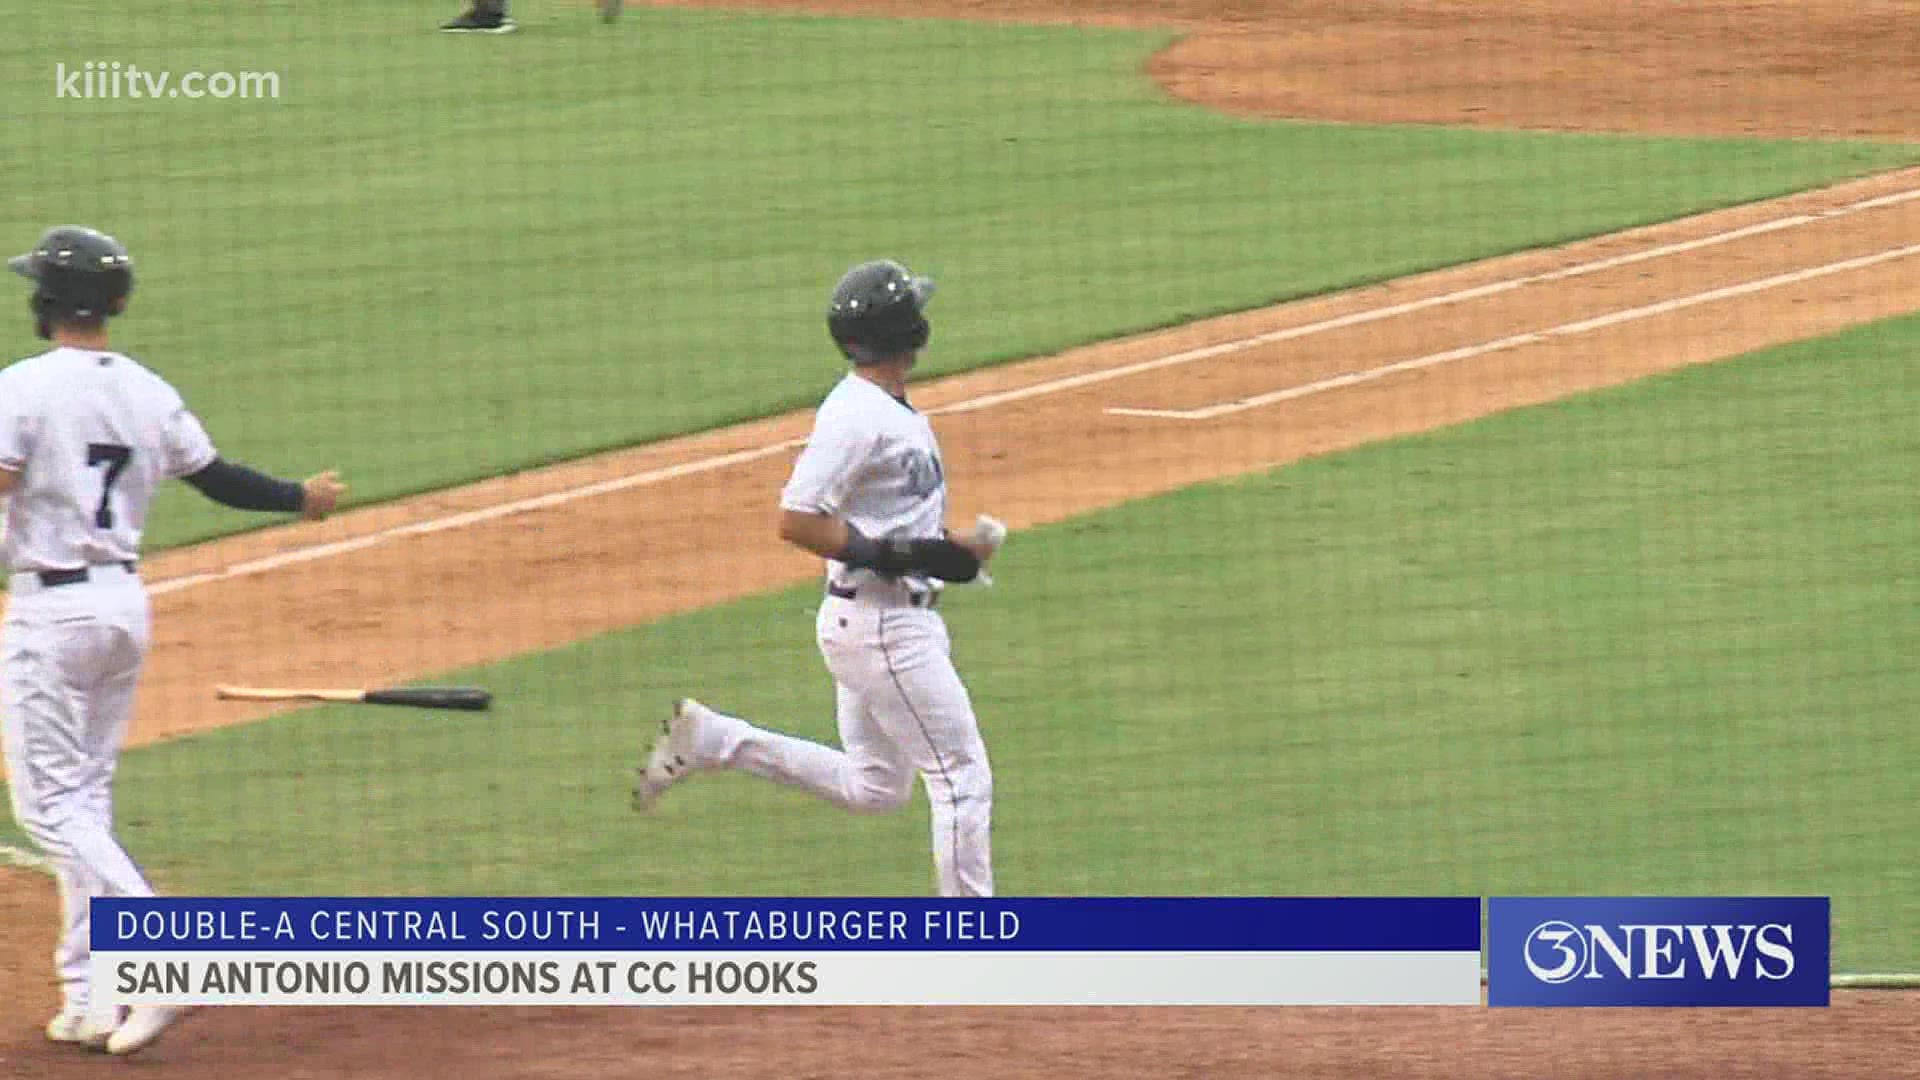 It had been 610 days between Hooks games at Whataburger Field thanks to COVID-19 cancelling the 2020 season.